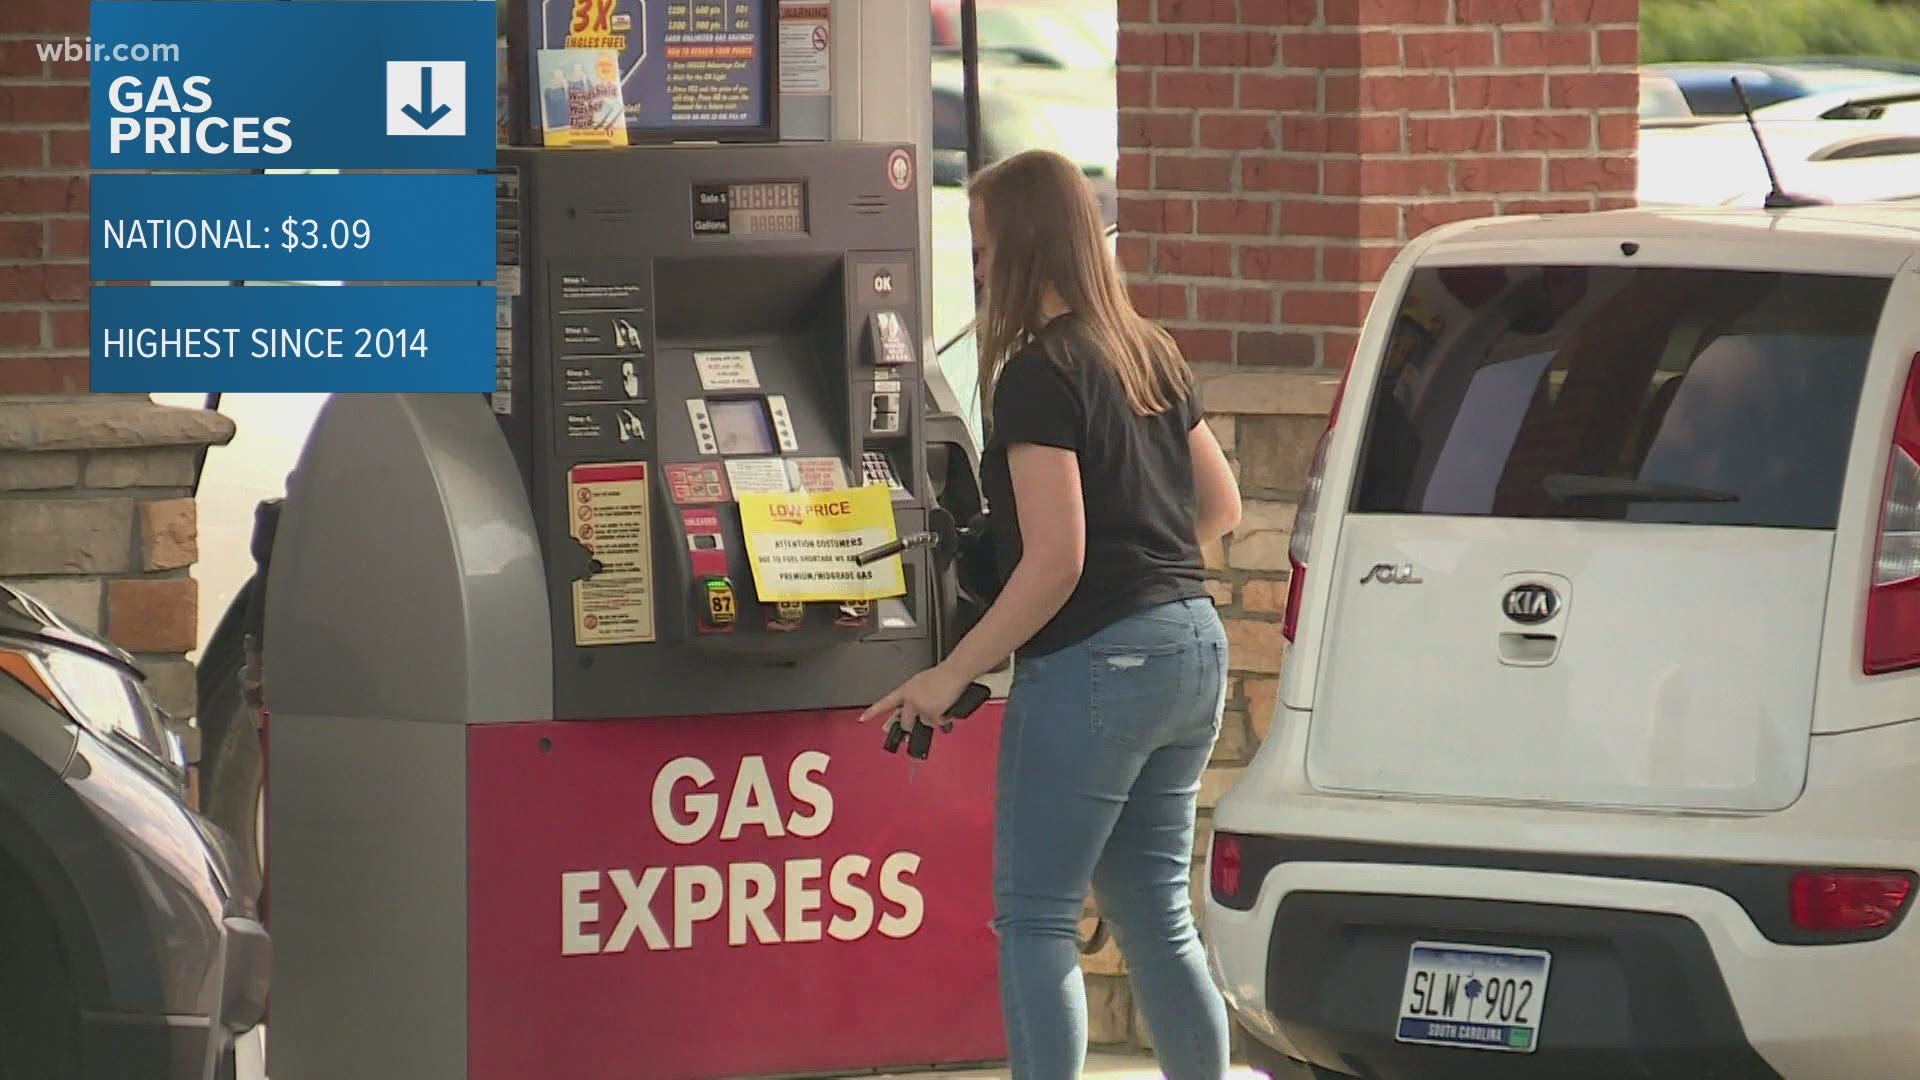 The national average price rose more than two-cents per gallon in the last two weeks to $3.09